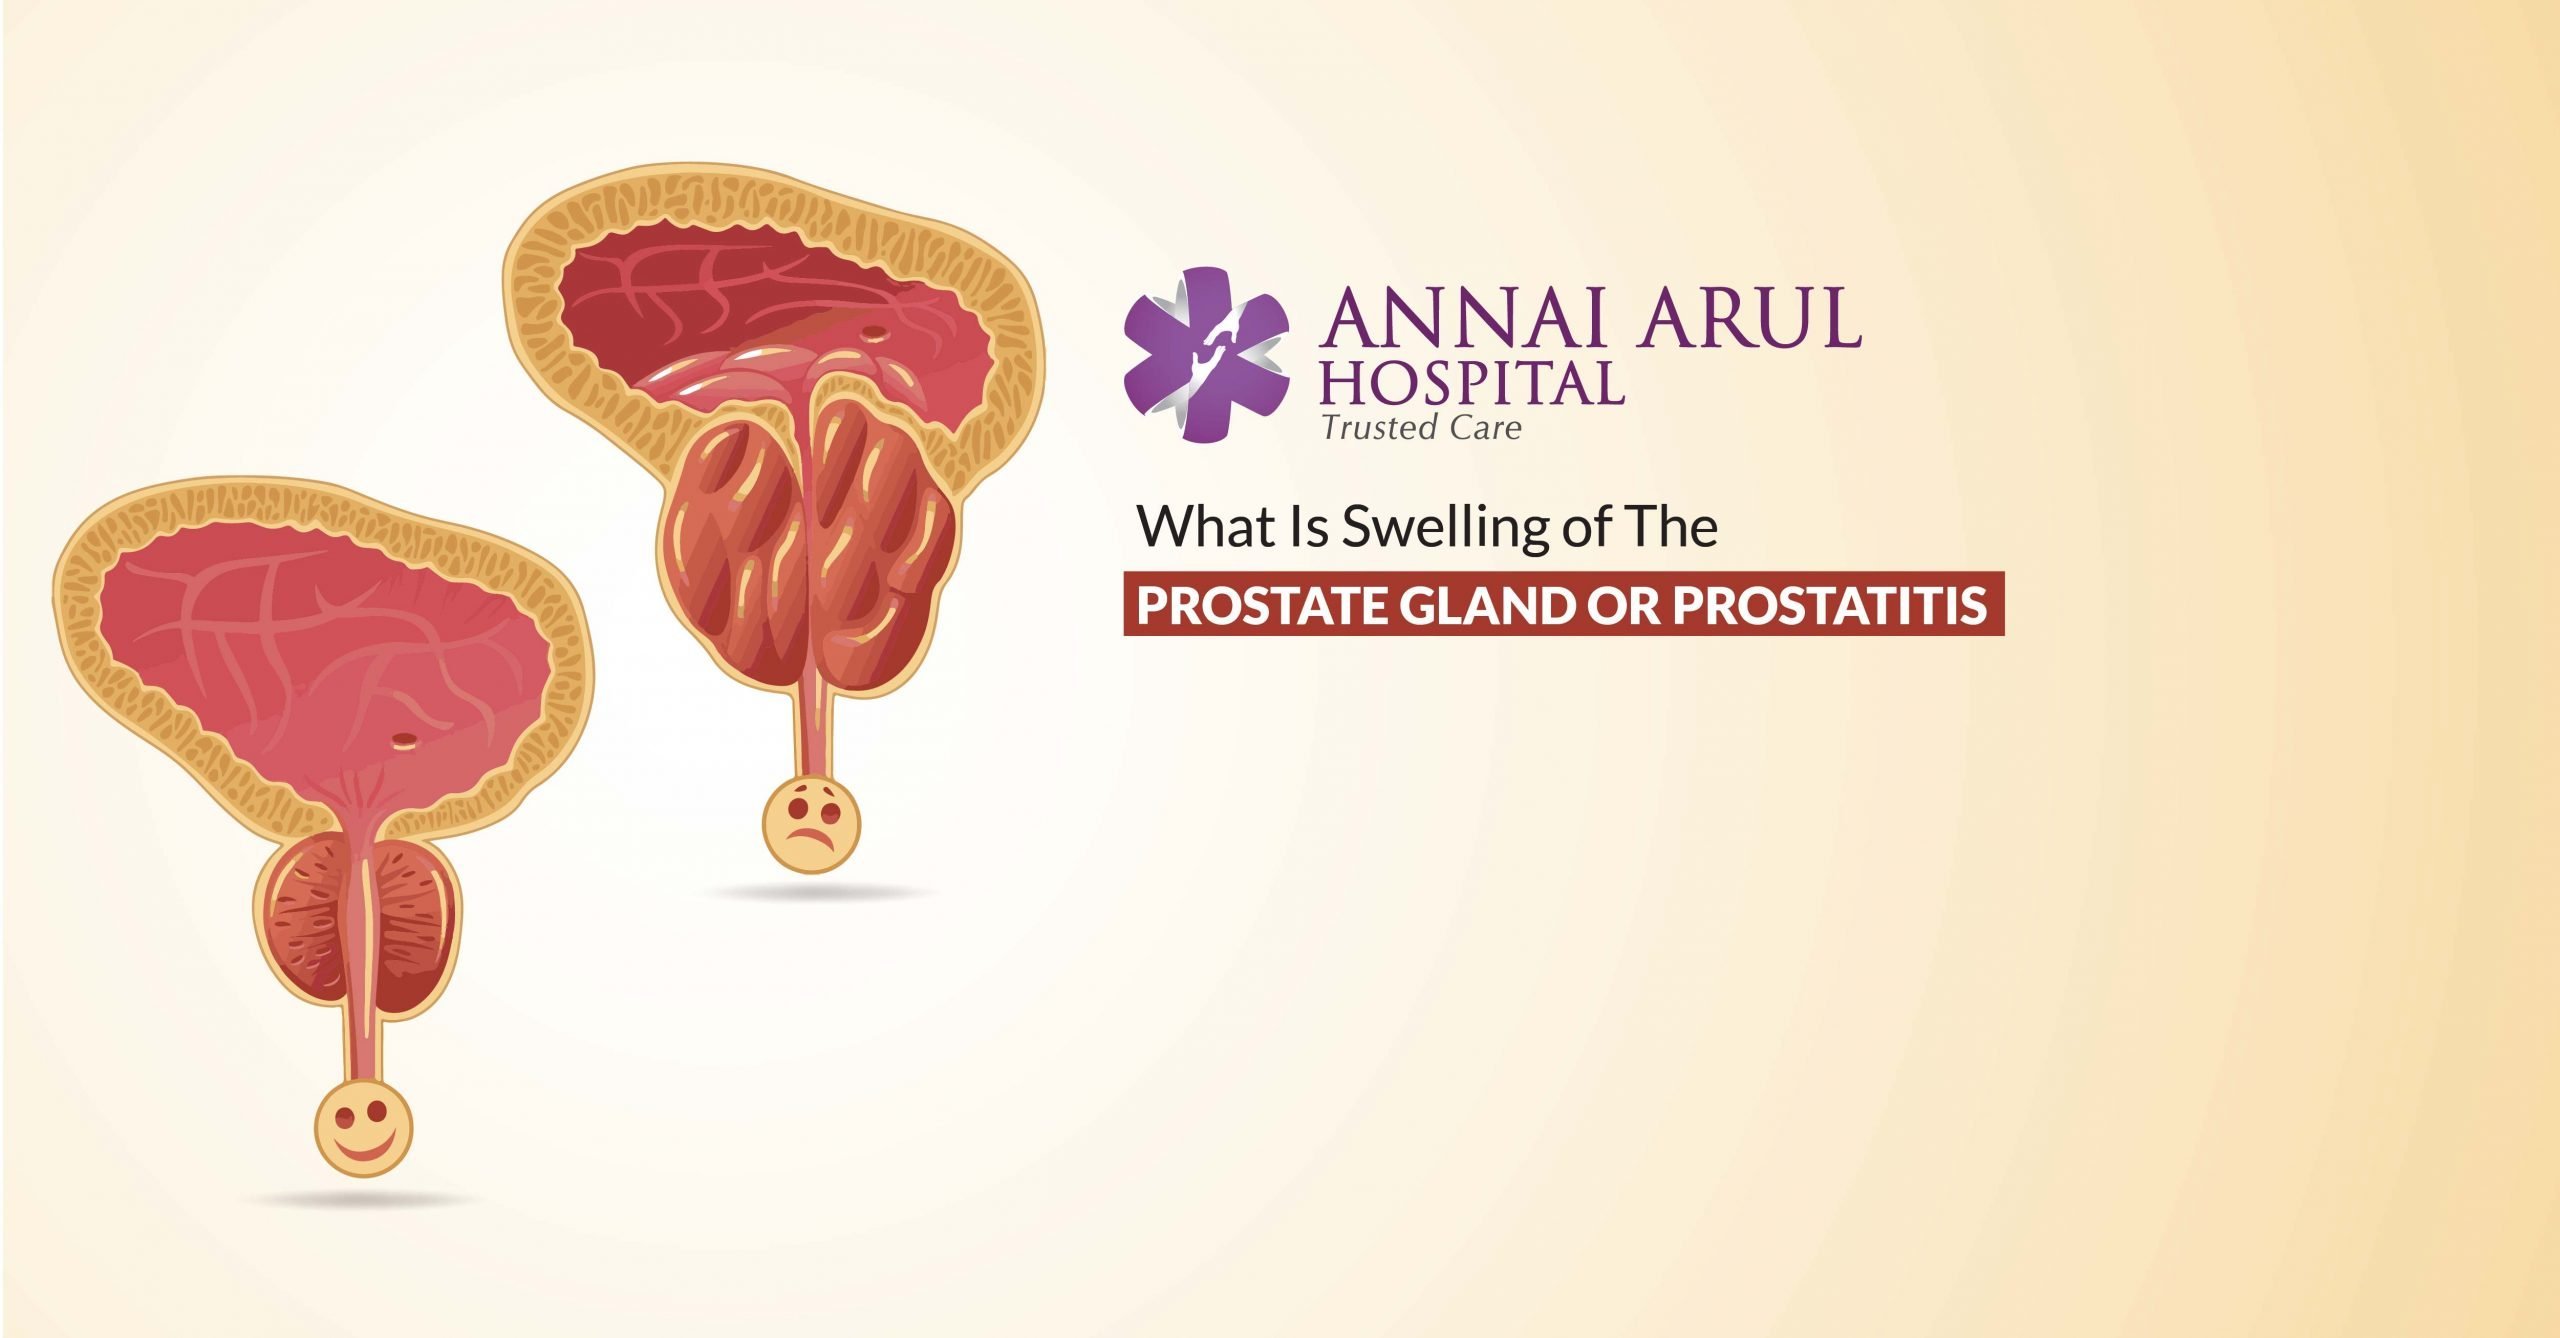 WHAT IS SWELLING OF THE PROSTATE GLAND OR PROSTATITIS ...